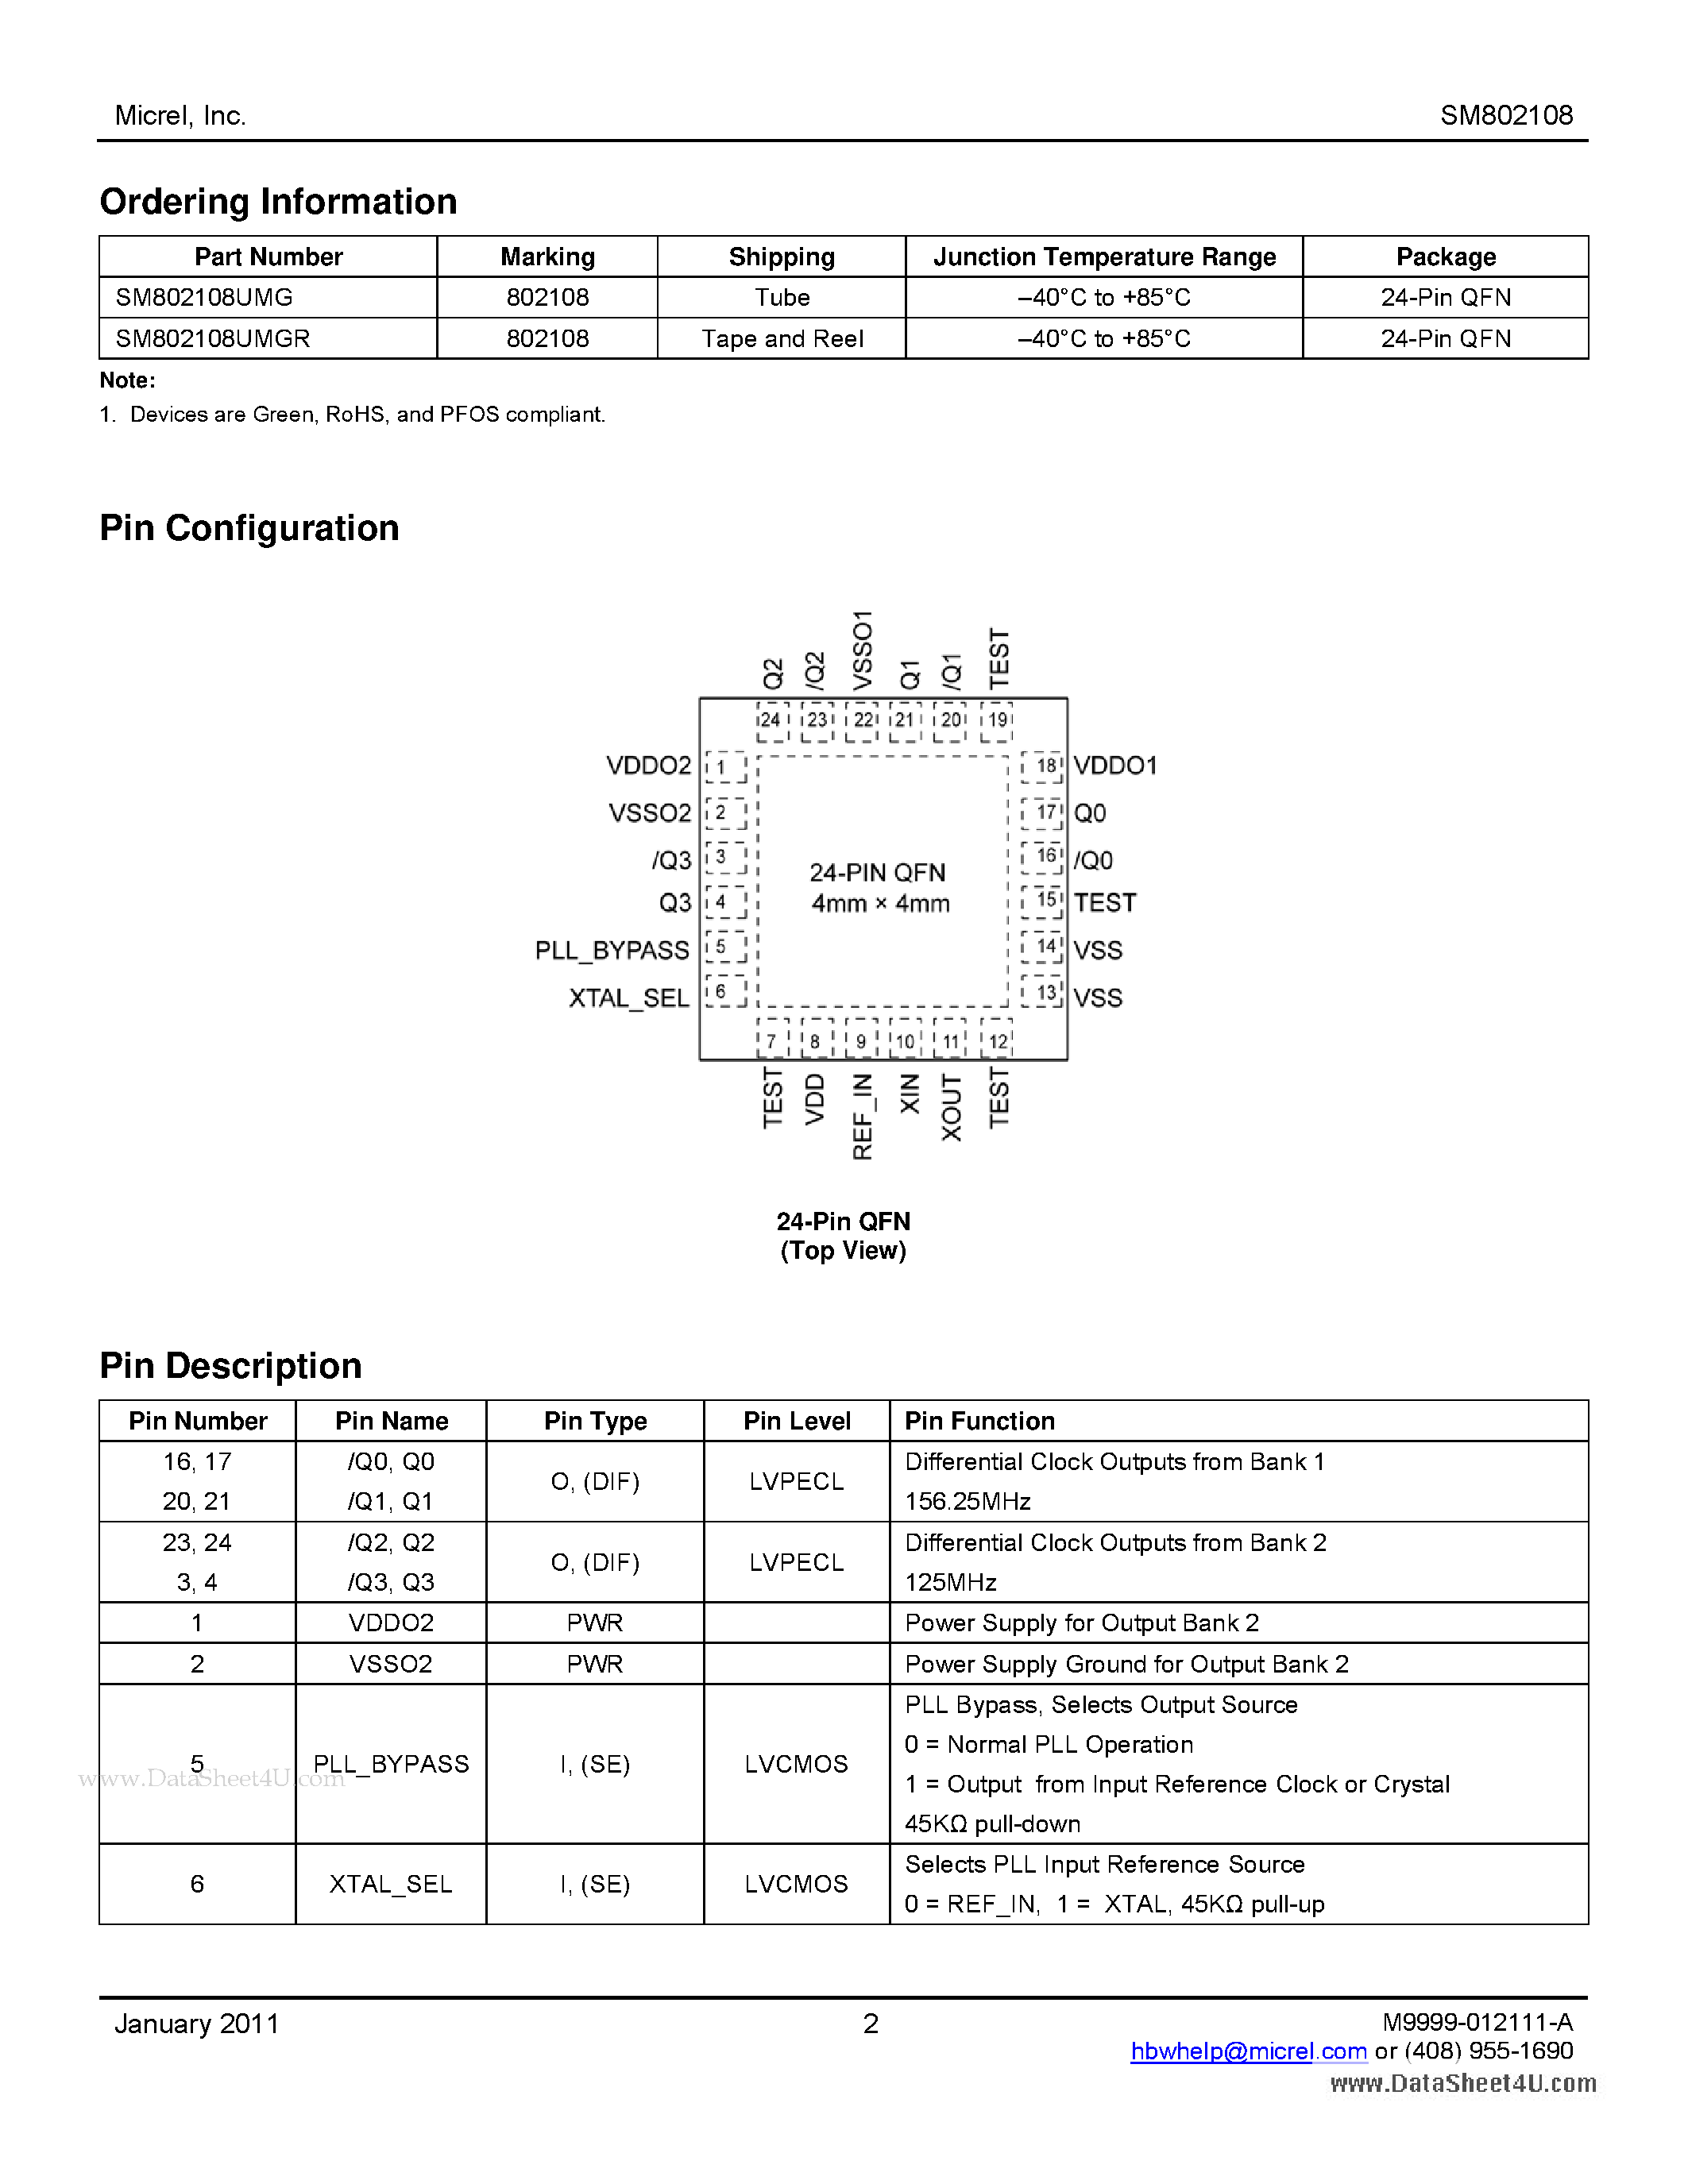 Datasheet SM802108 - ClockWorks 10GbE & GbE (156.25MHz 125MHz) Ultra-Low Jitter - LVPECL Frequency Synthesizer page 2